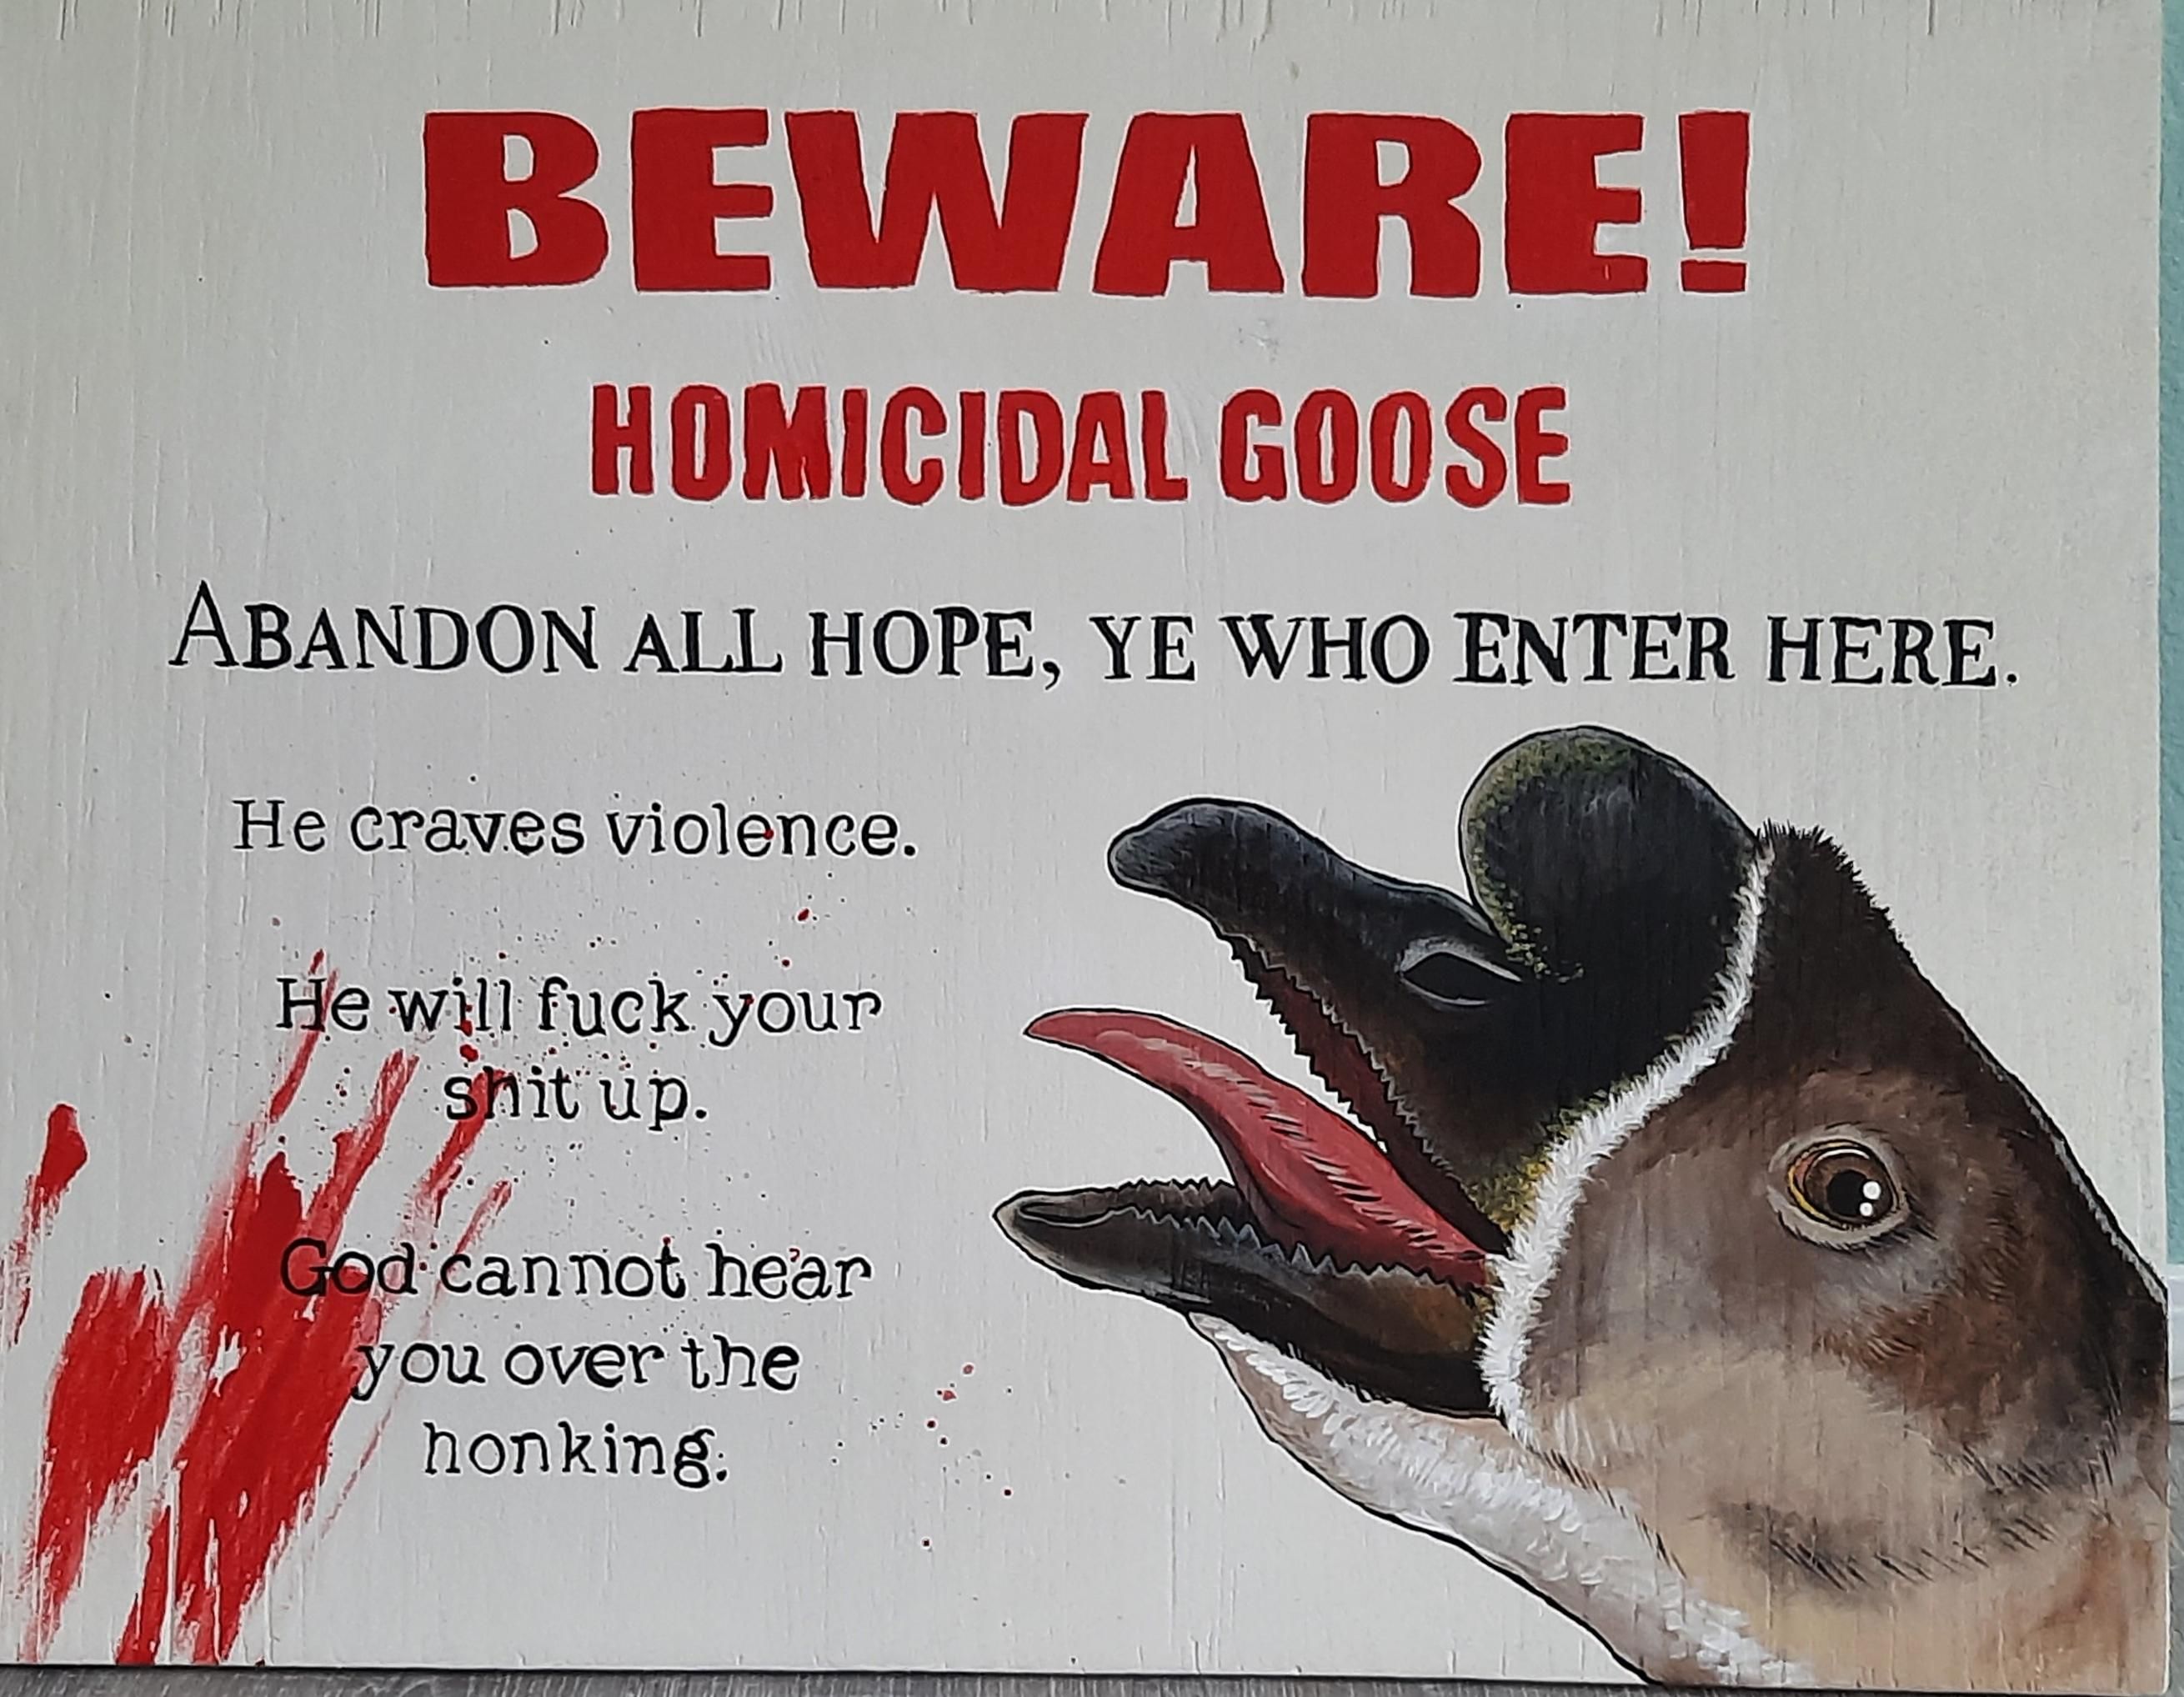 I painted a sign for my goose to warn people.